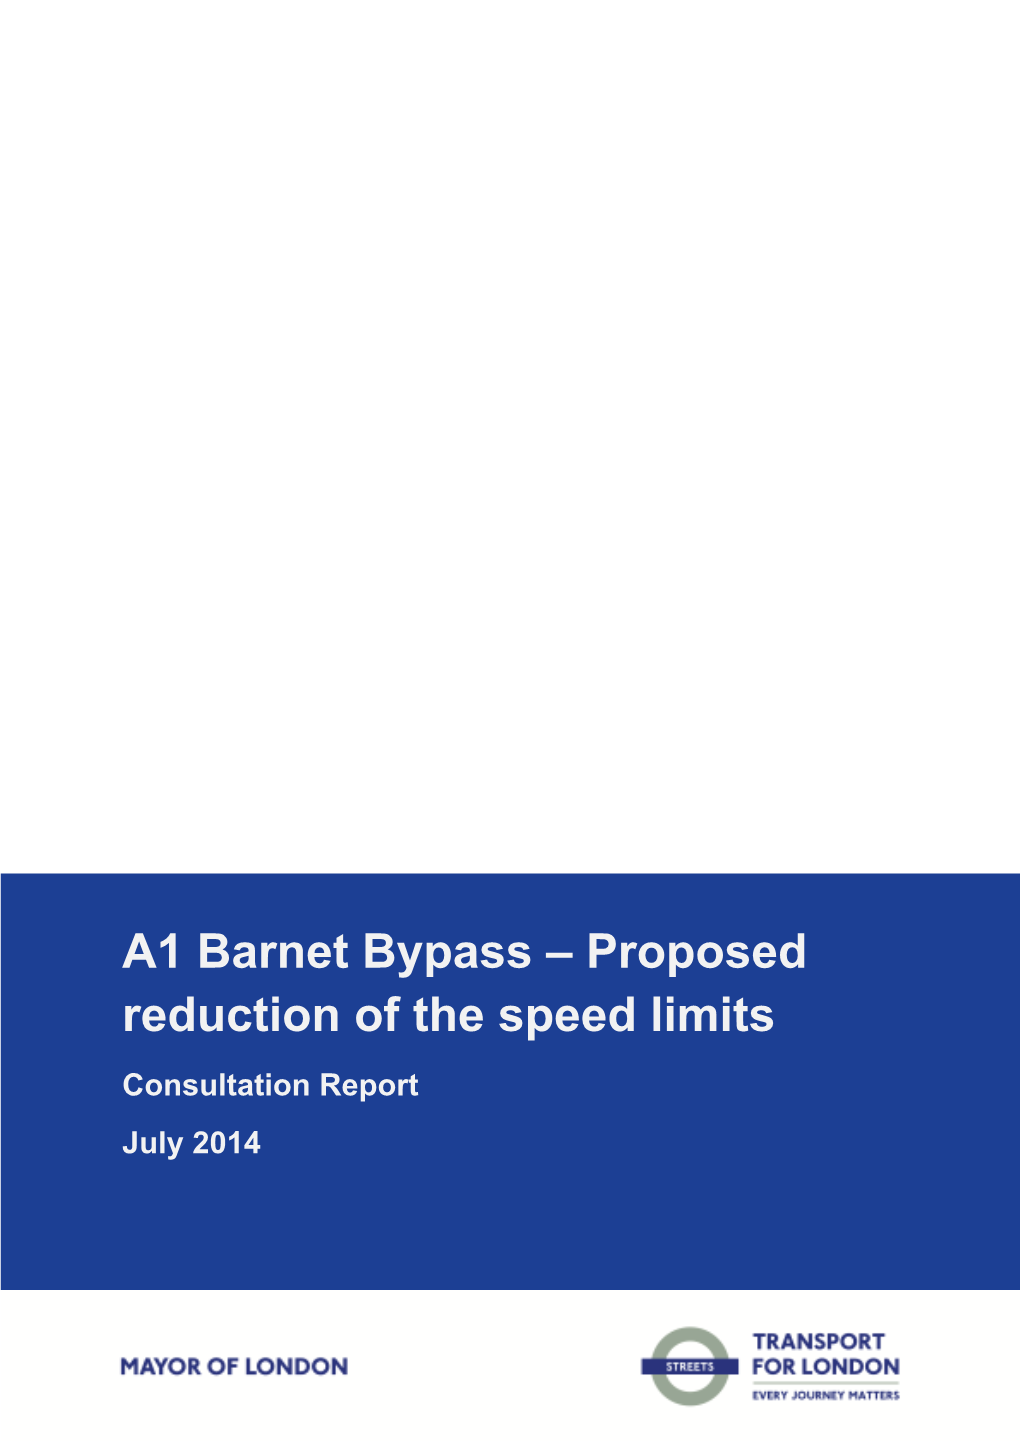 A1 Barnet Bypass – Proposed Reduction of the Speed Limits Consultation Report July 2014